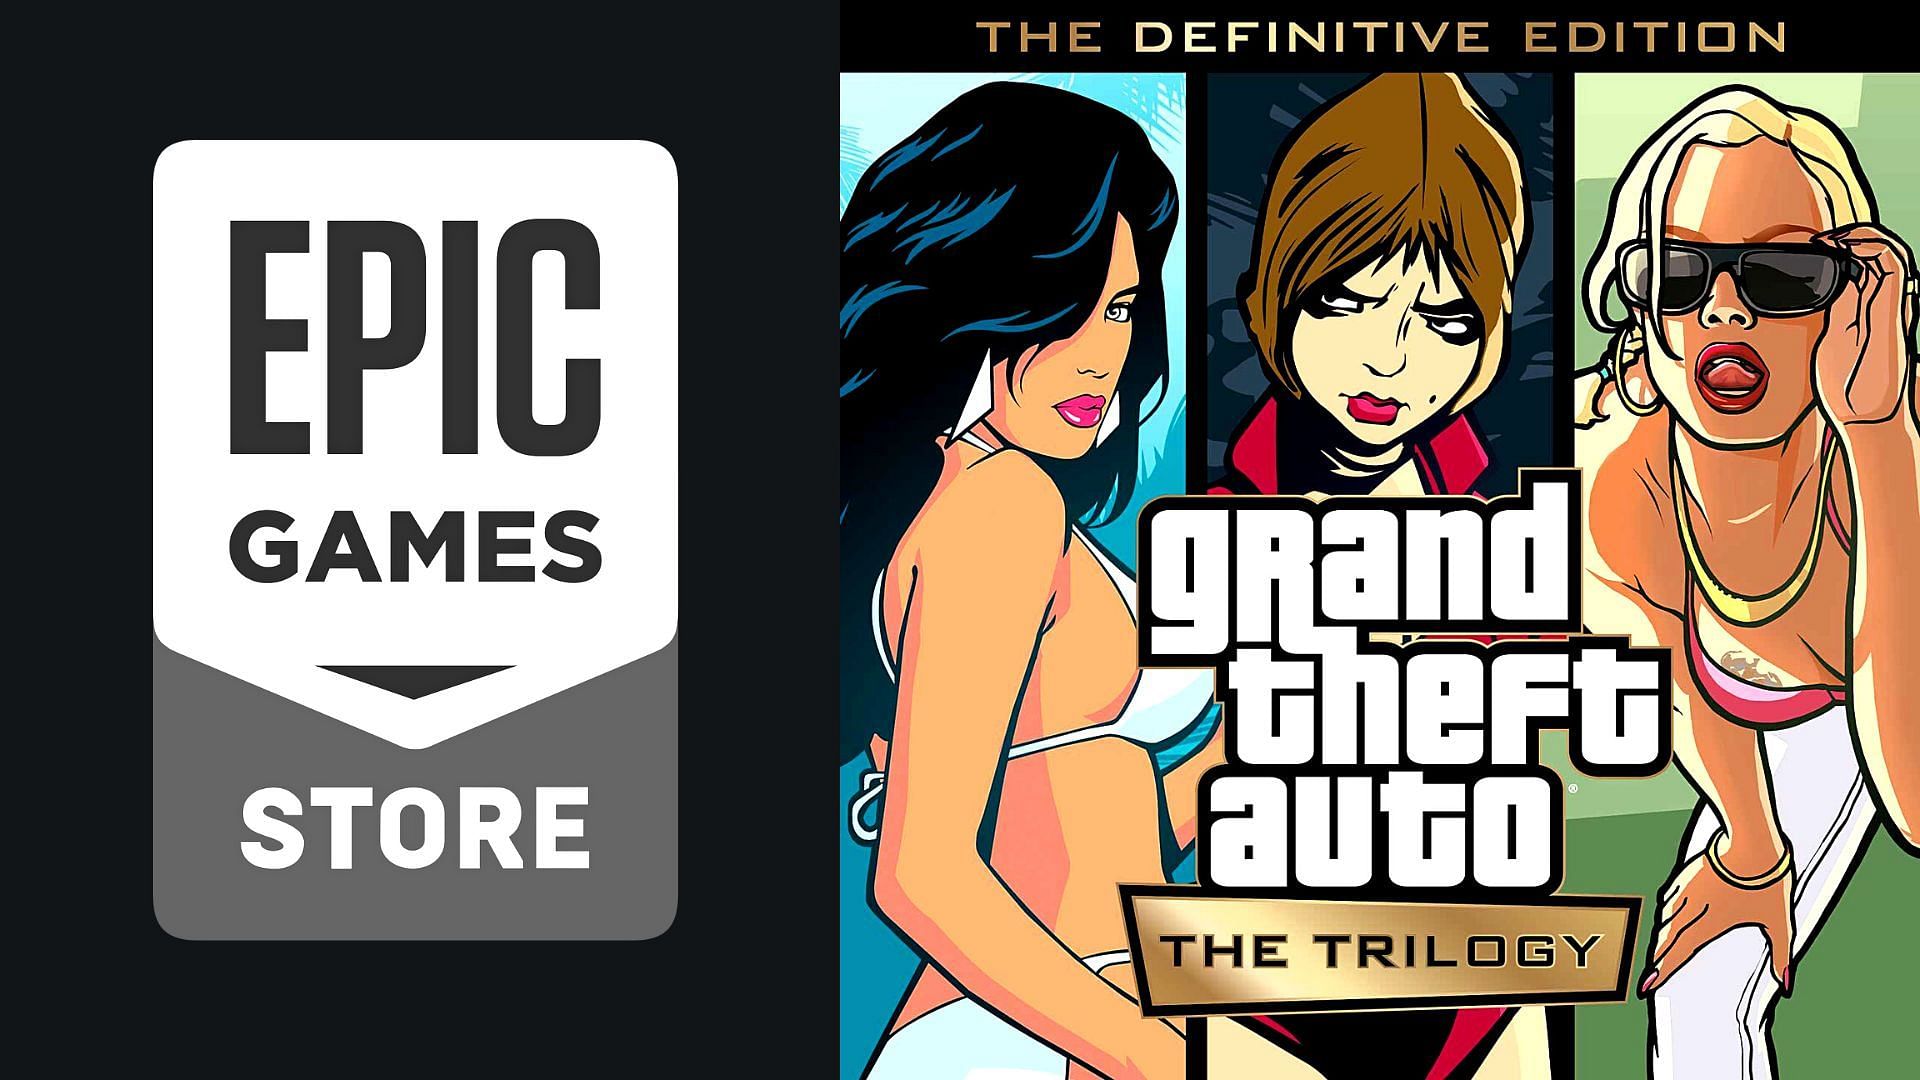 A brief report on the delay of the GTA Trilogy Definitive Edition by Rockstar for its release on Epic Games Store (Image via Rockstar Games)